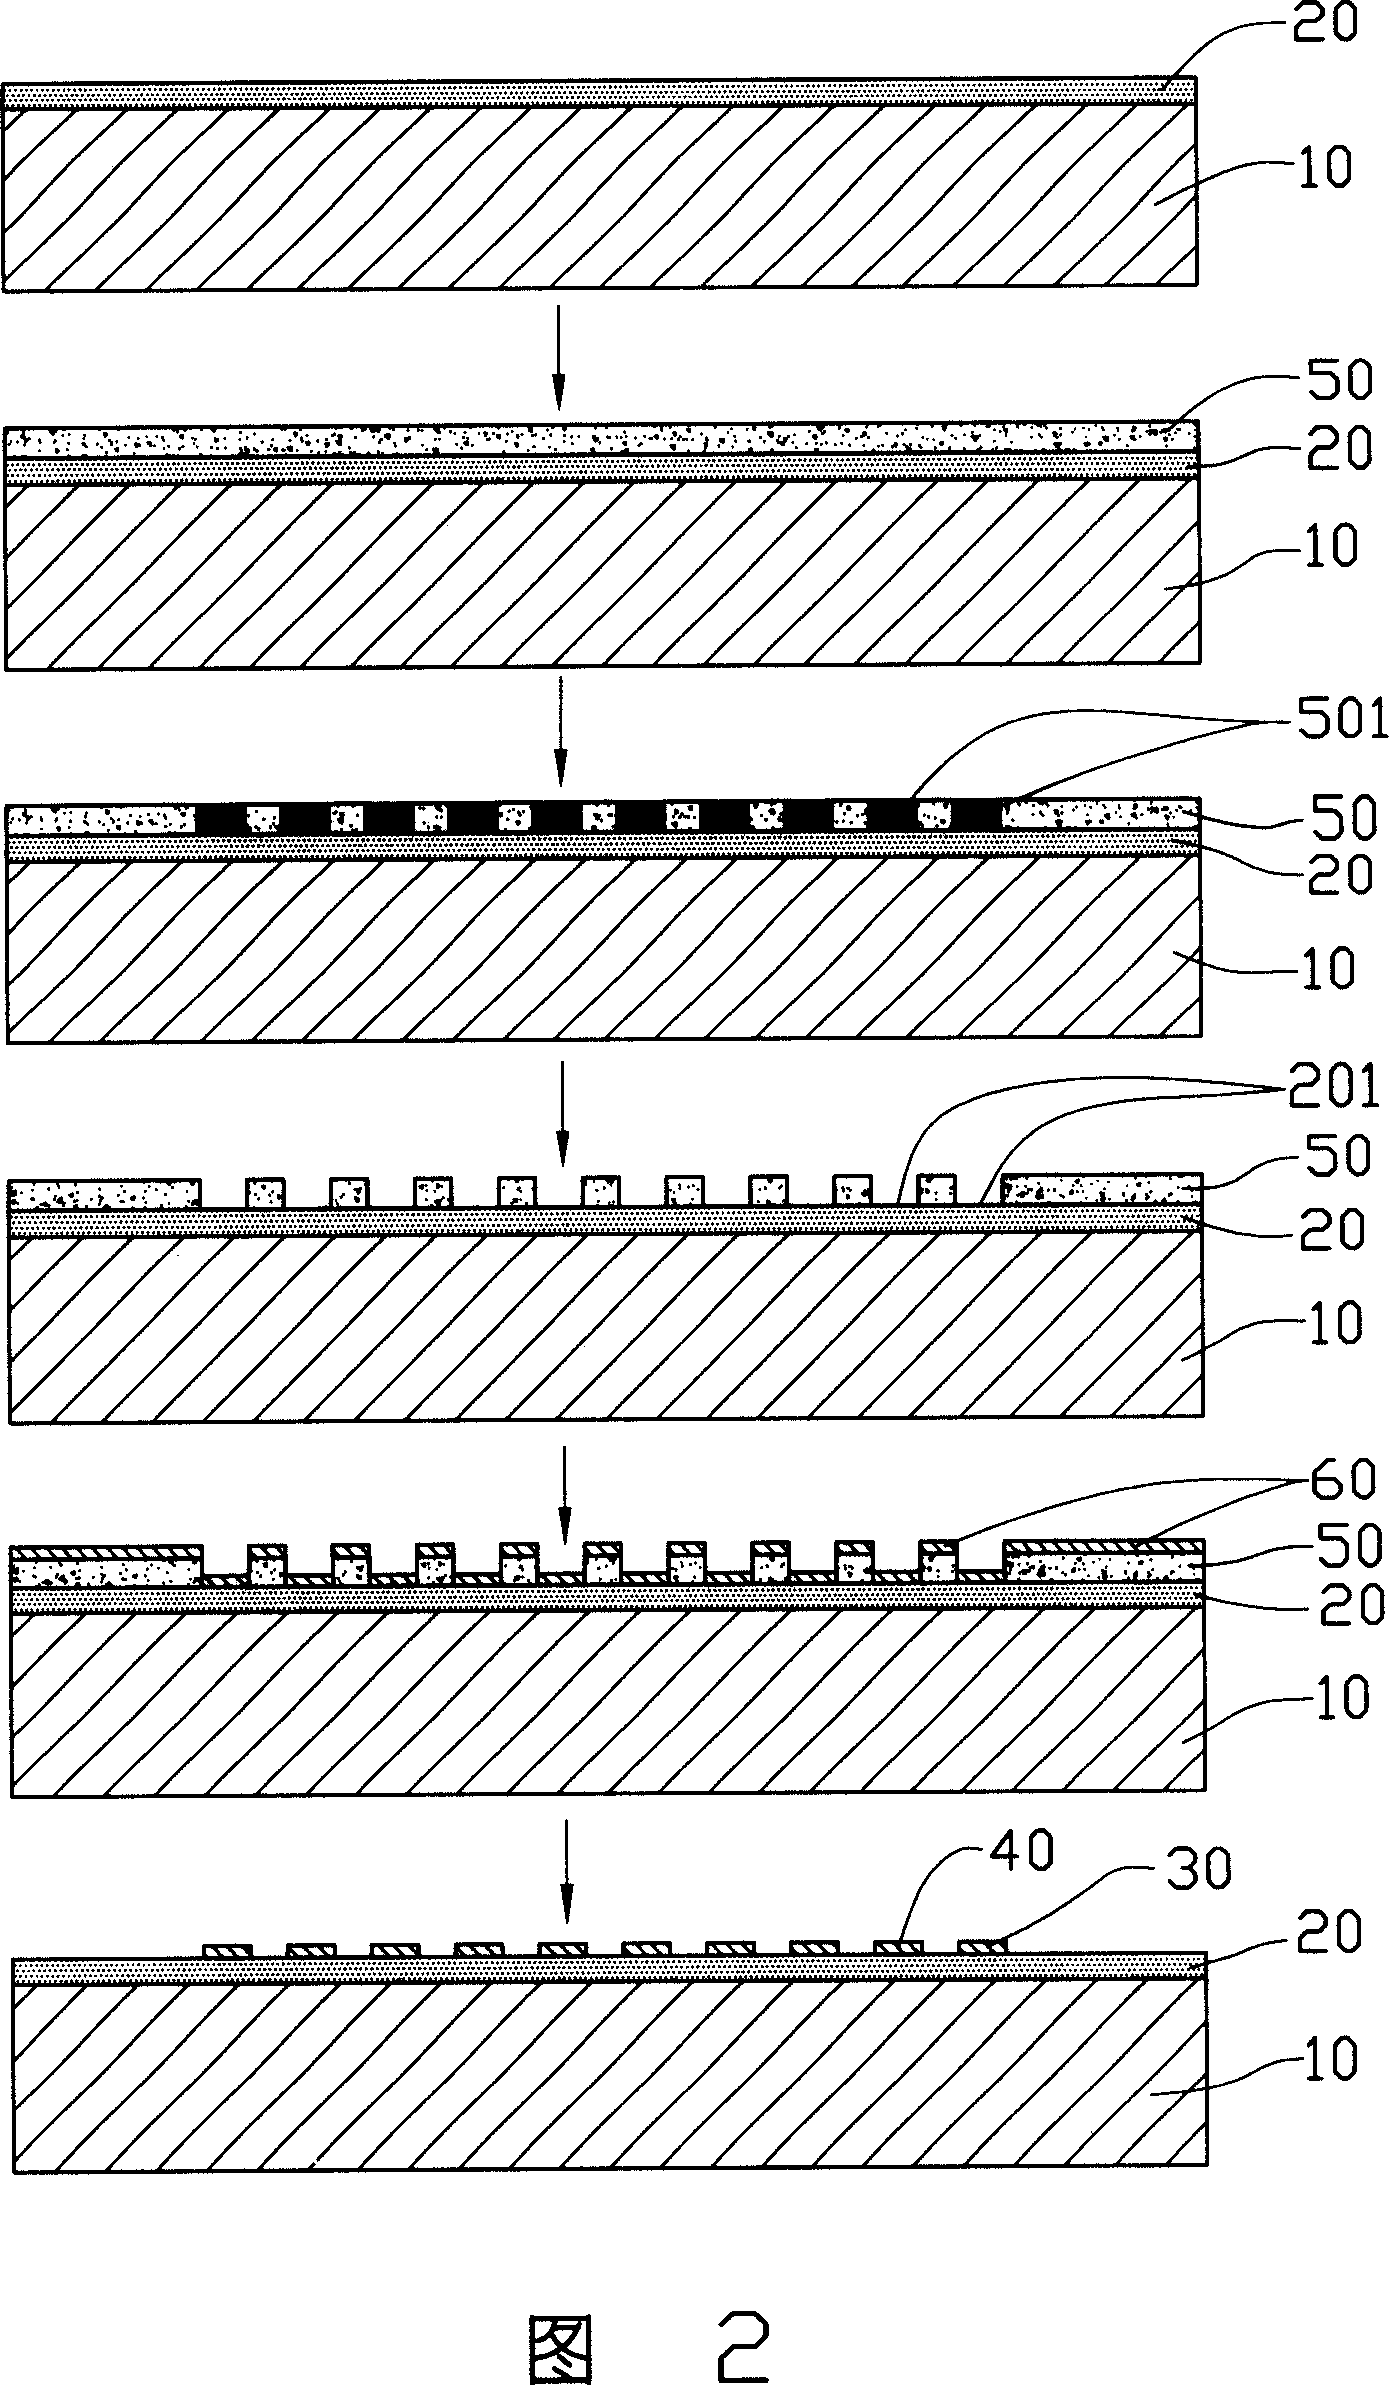 Surface acoustic wave element and method for making same